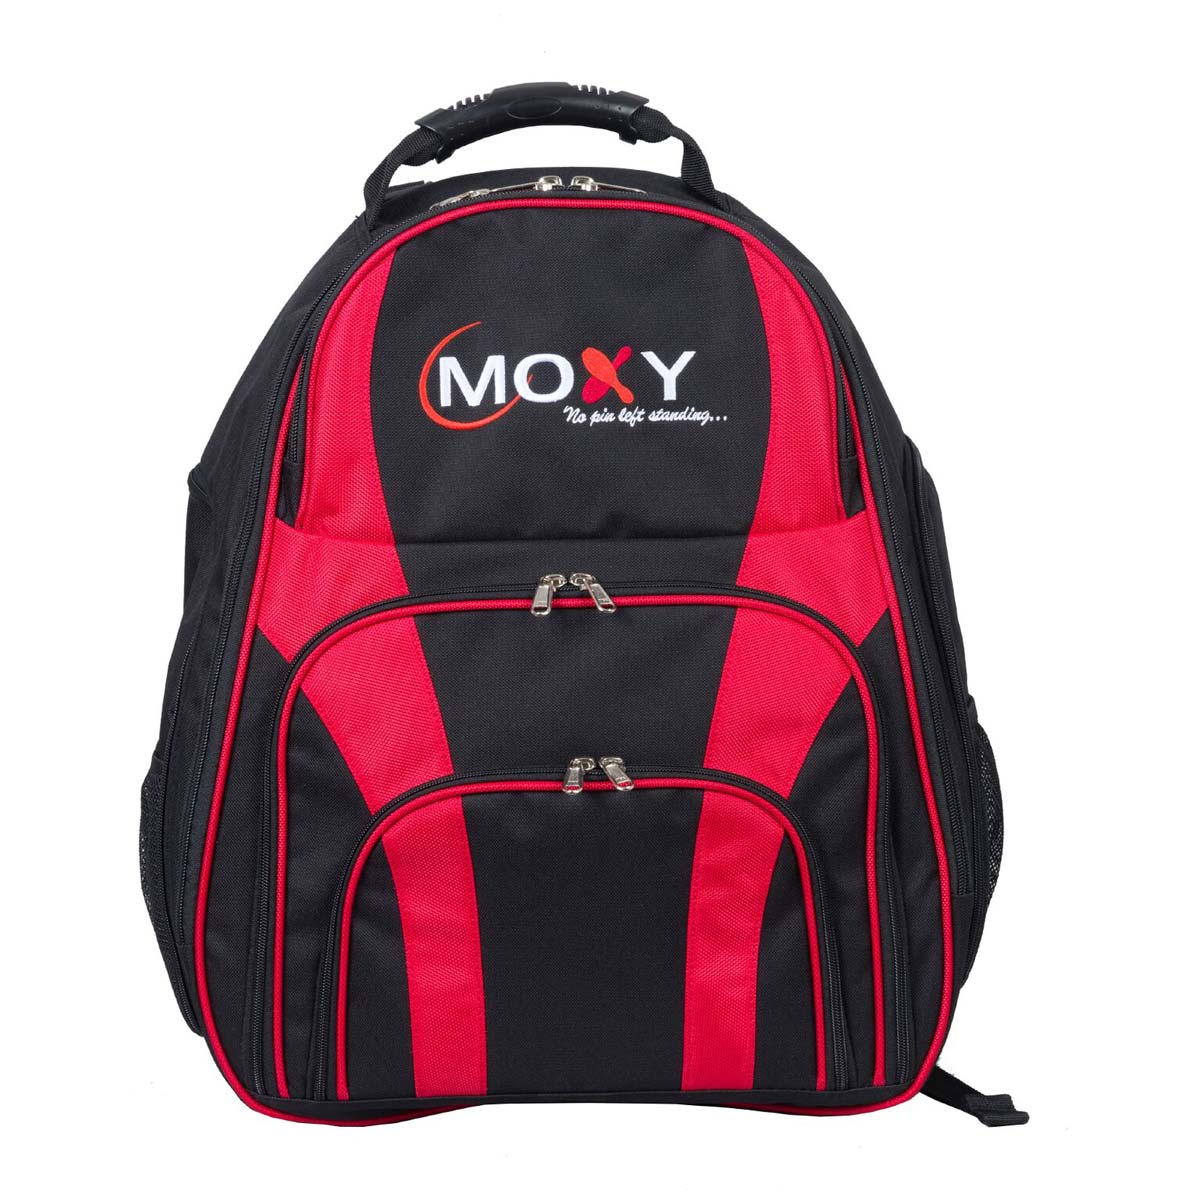 Moxy 2-Ball Roller Bowling Bag - Red 